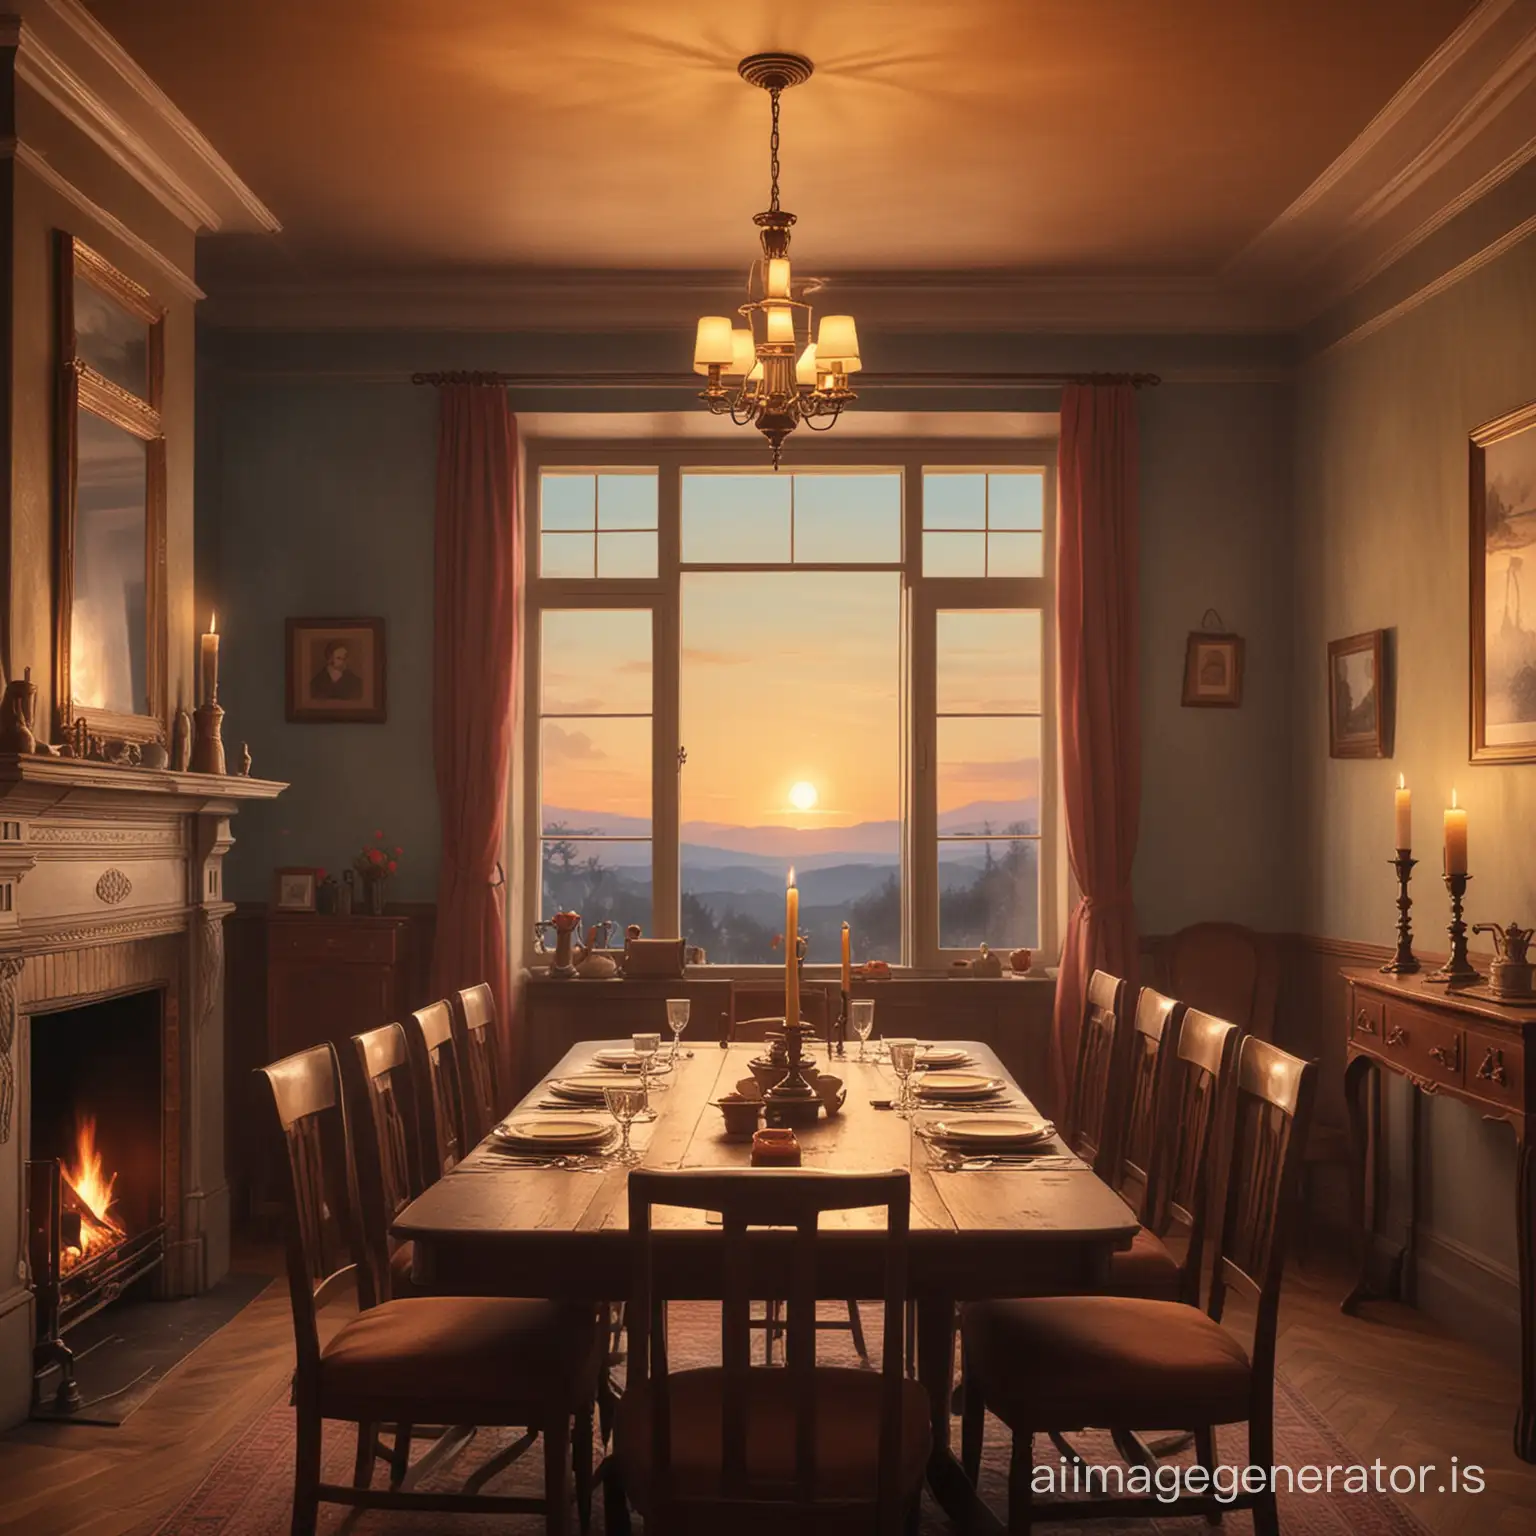 Luxurious-1920s-Dining-Room-with-Fireplace-and-Evening-Sky